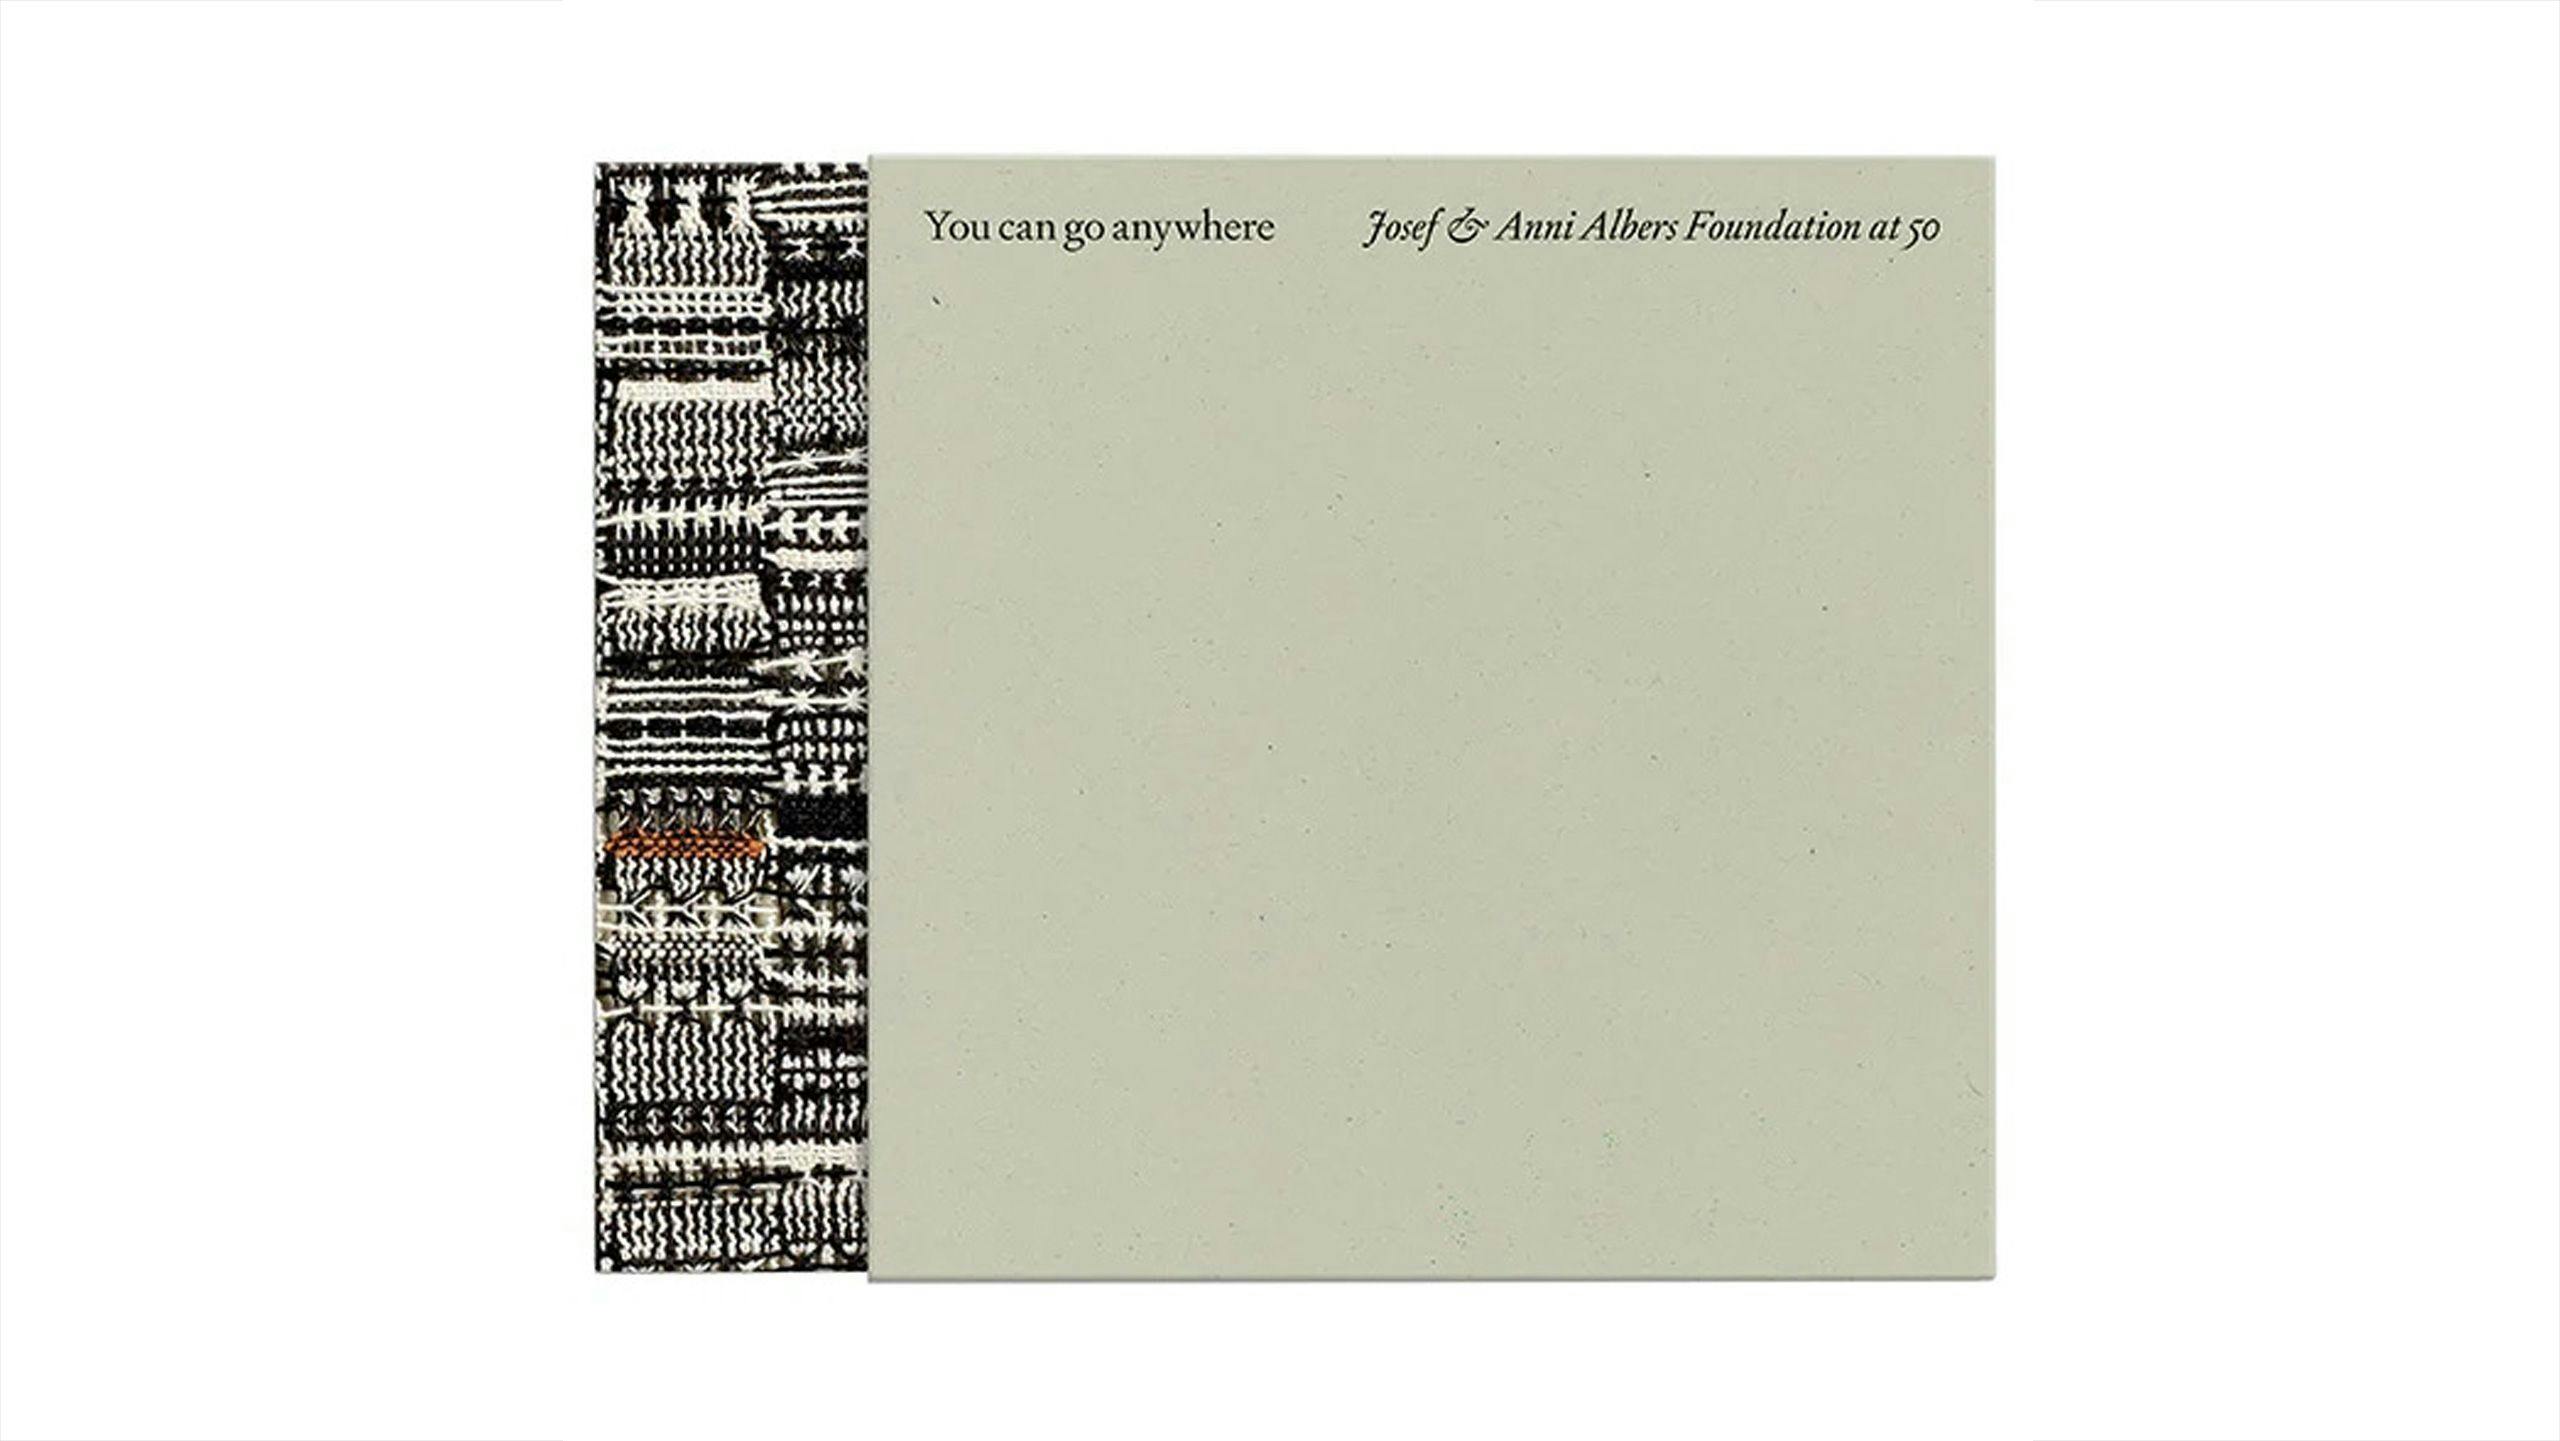 The cover of You can go anywhere: Josef & Anni Albers Foundation at 50